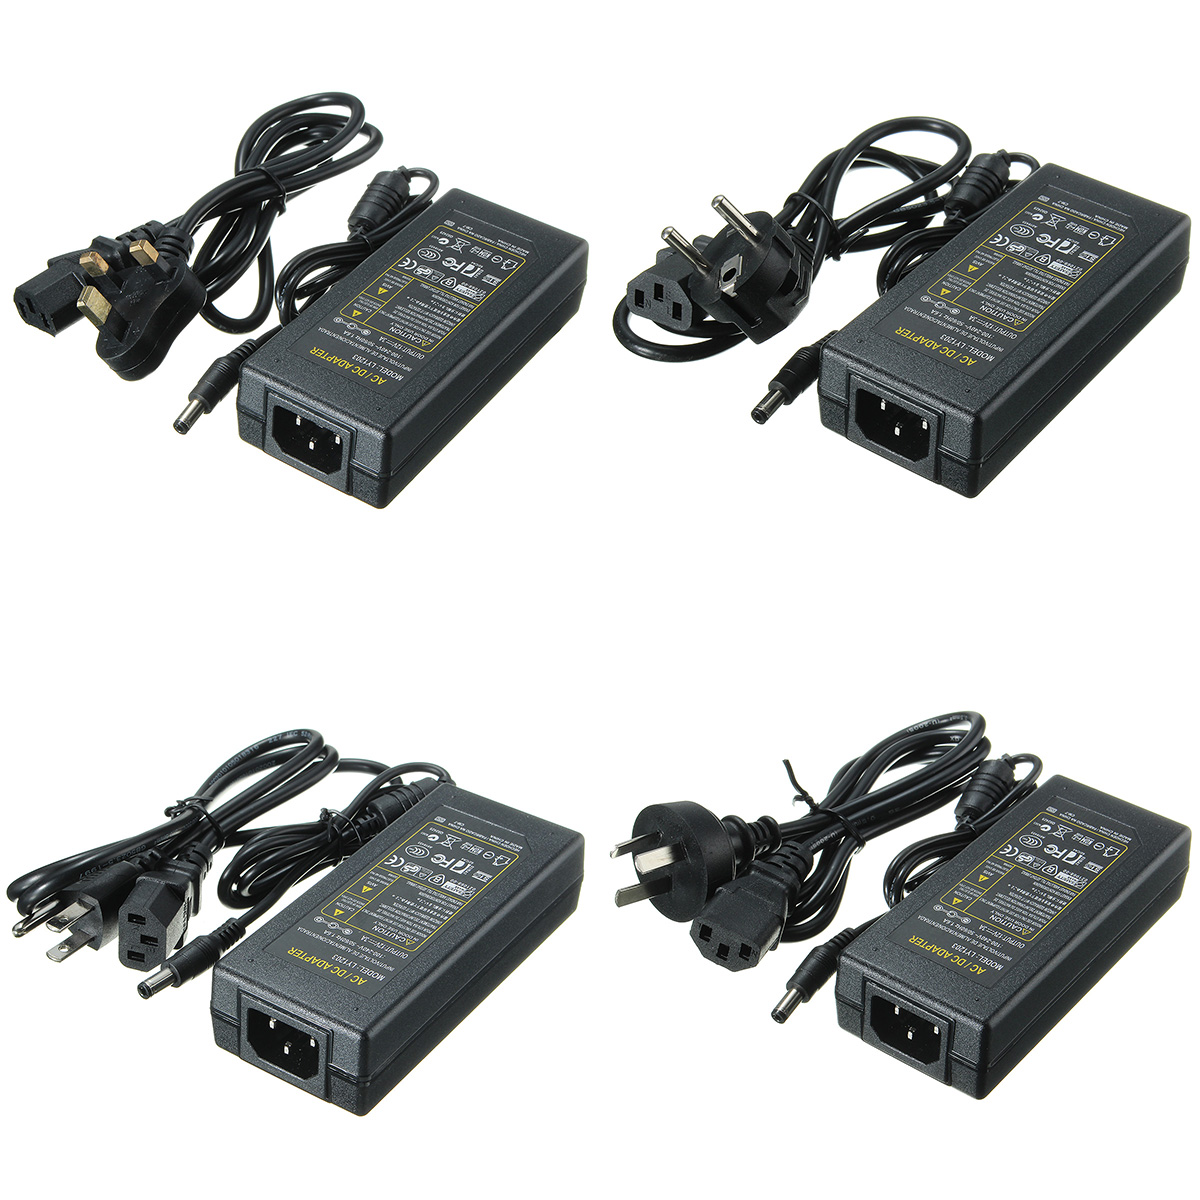 AC-100-240V-to-DC-12V-3A-36W-Power-Supply-Adapter-for-LED-Strip-86979-2